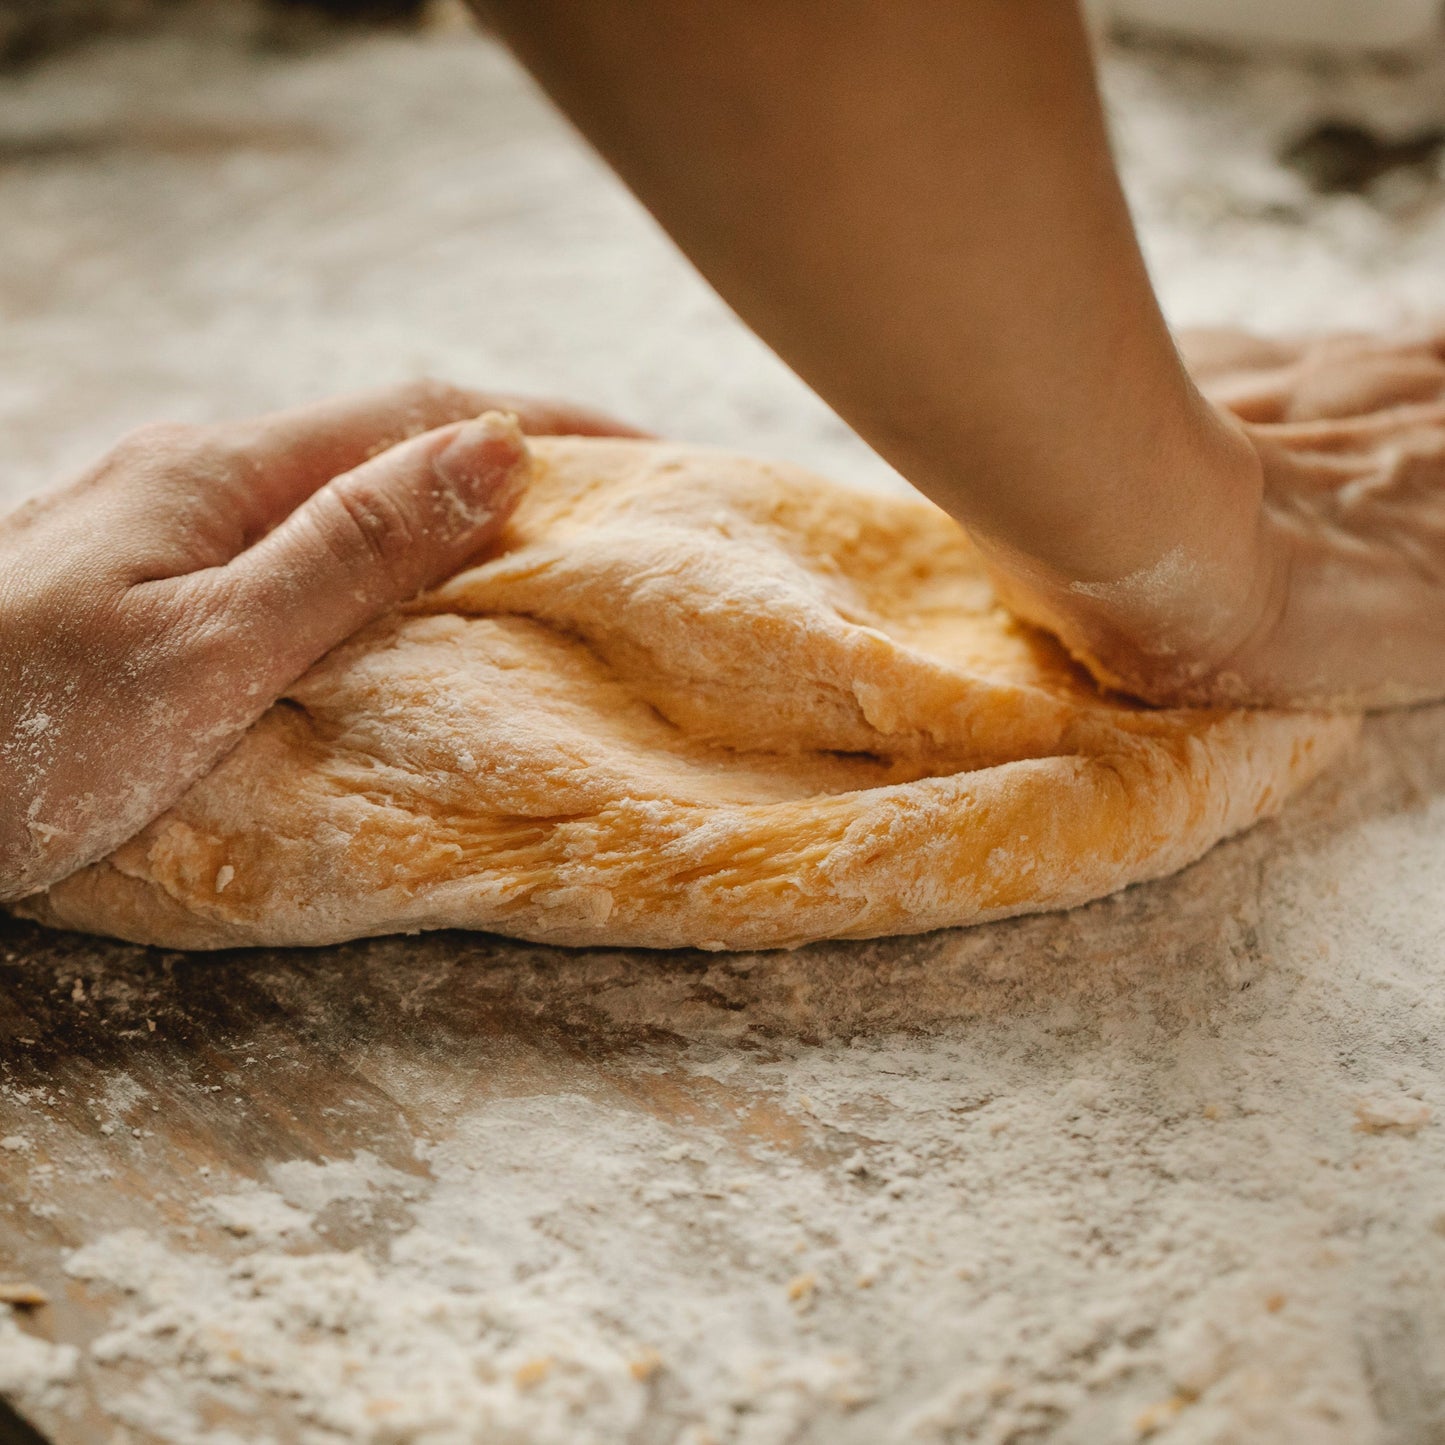 Bachelorette party bread. Make an aromatic and authentic artisan bread with friends